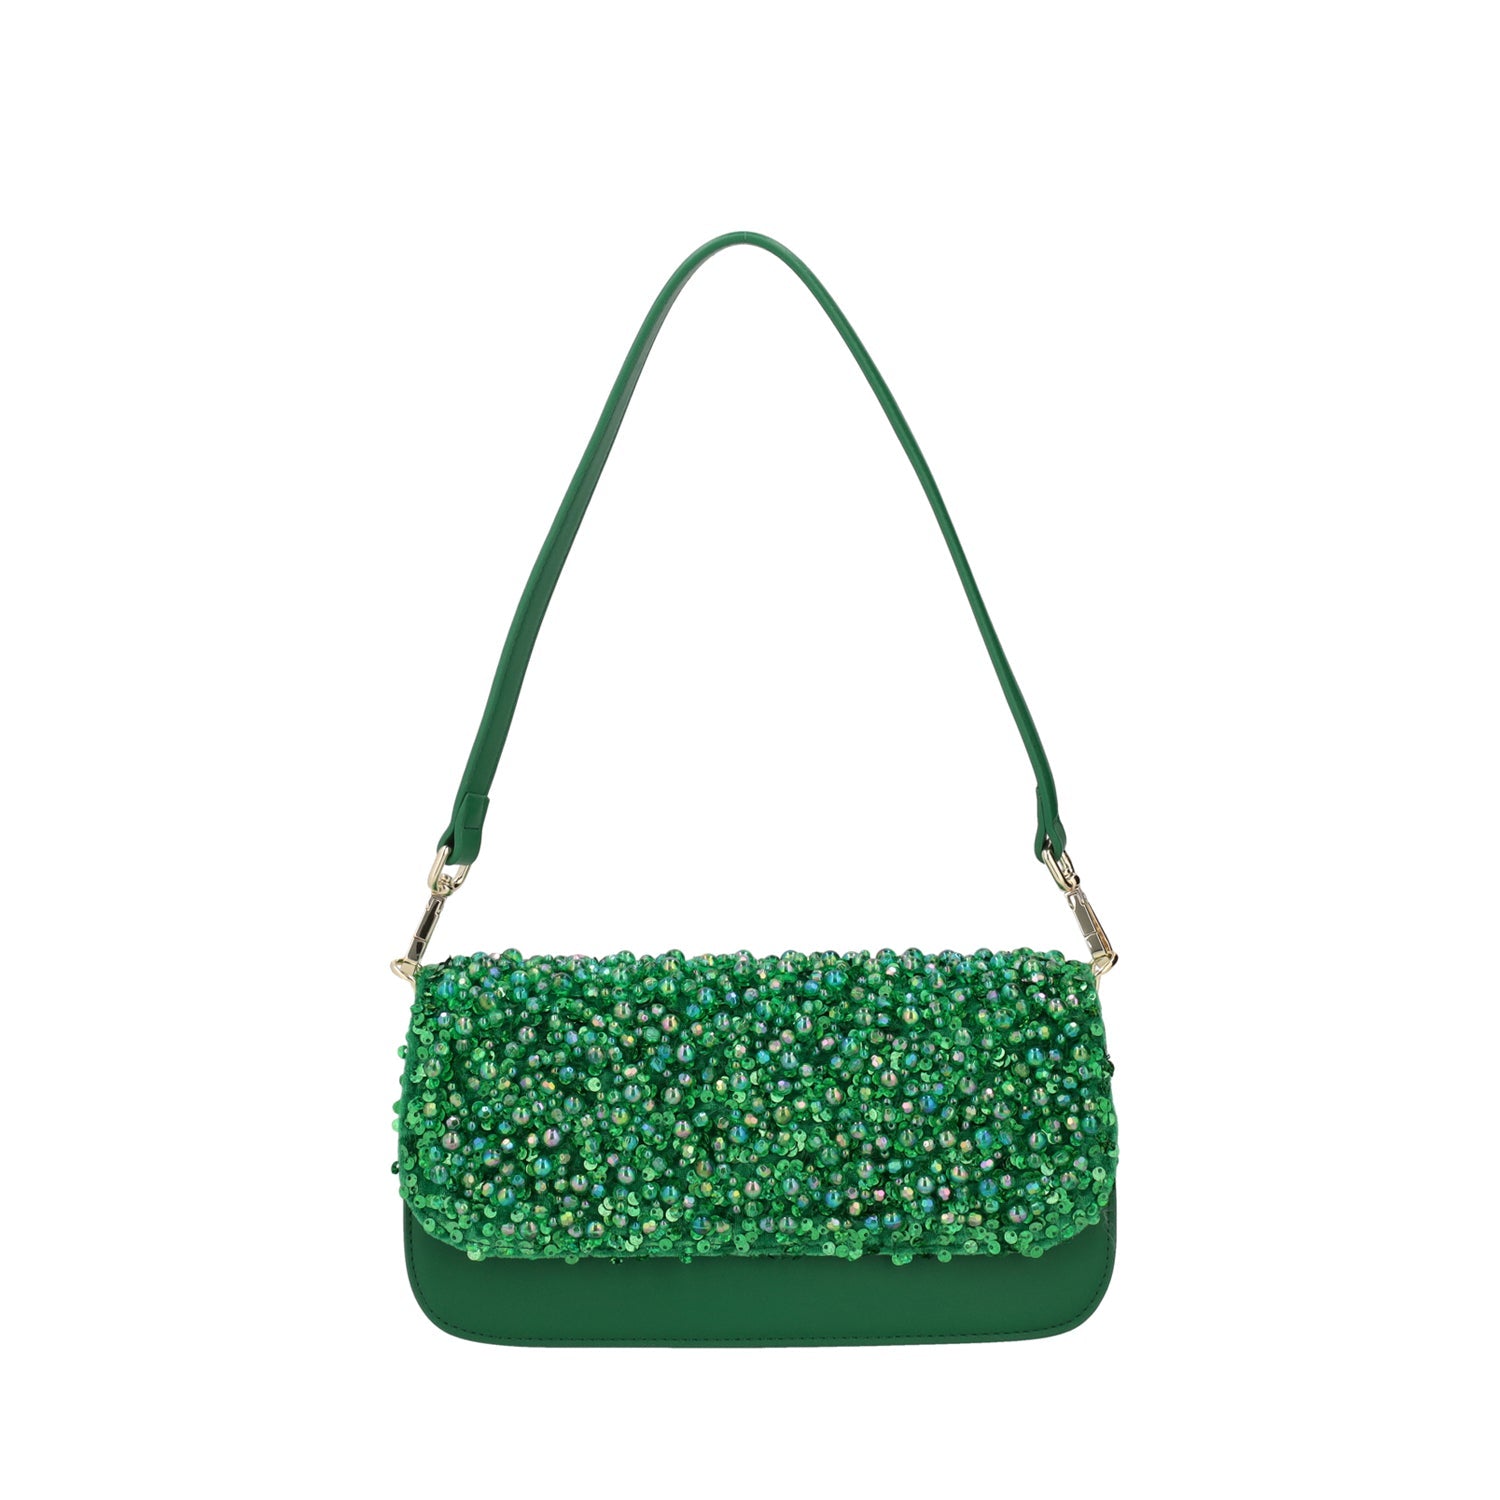 GREEN COSMOPOLITAN SHOULDER BAG EMBROIDERED WITH PEARL